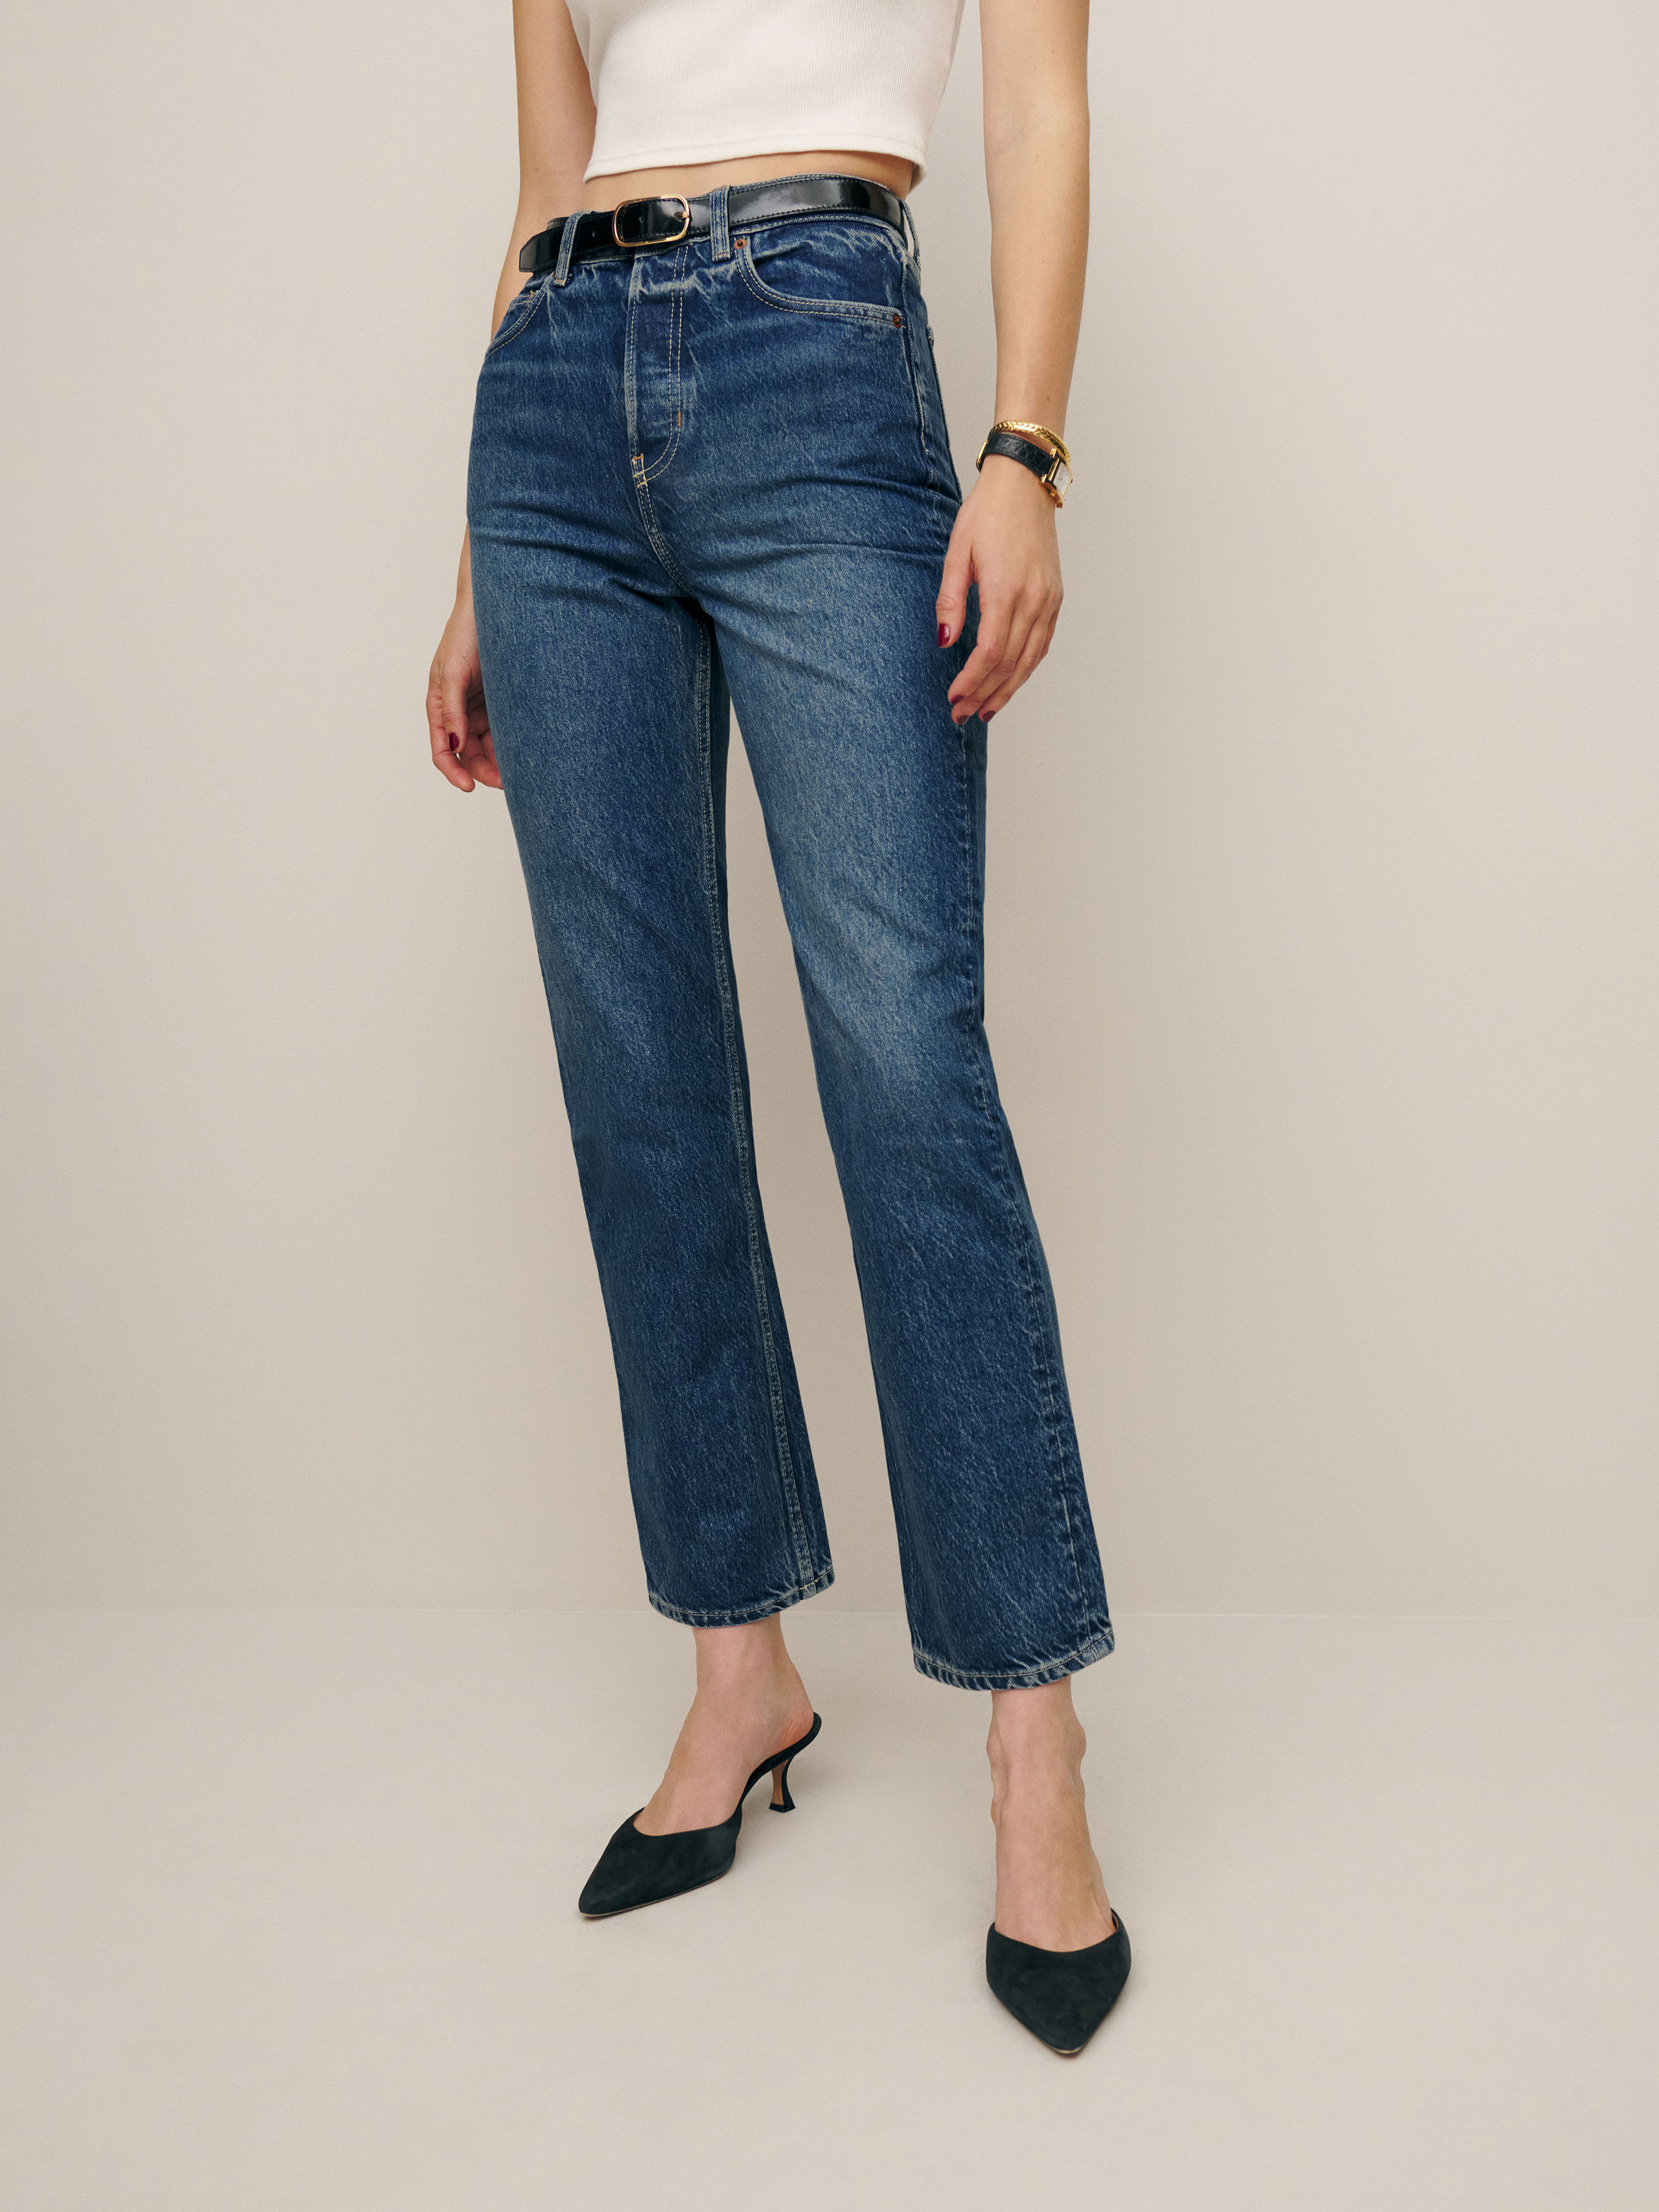 Reformation Cynthia High Rise Straight Cropped Jeans In Lanier